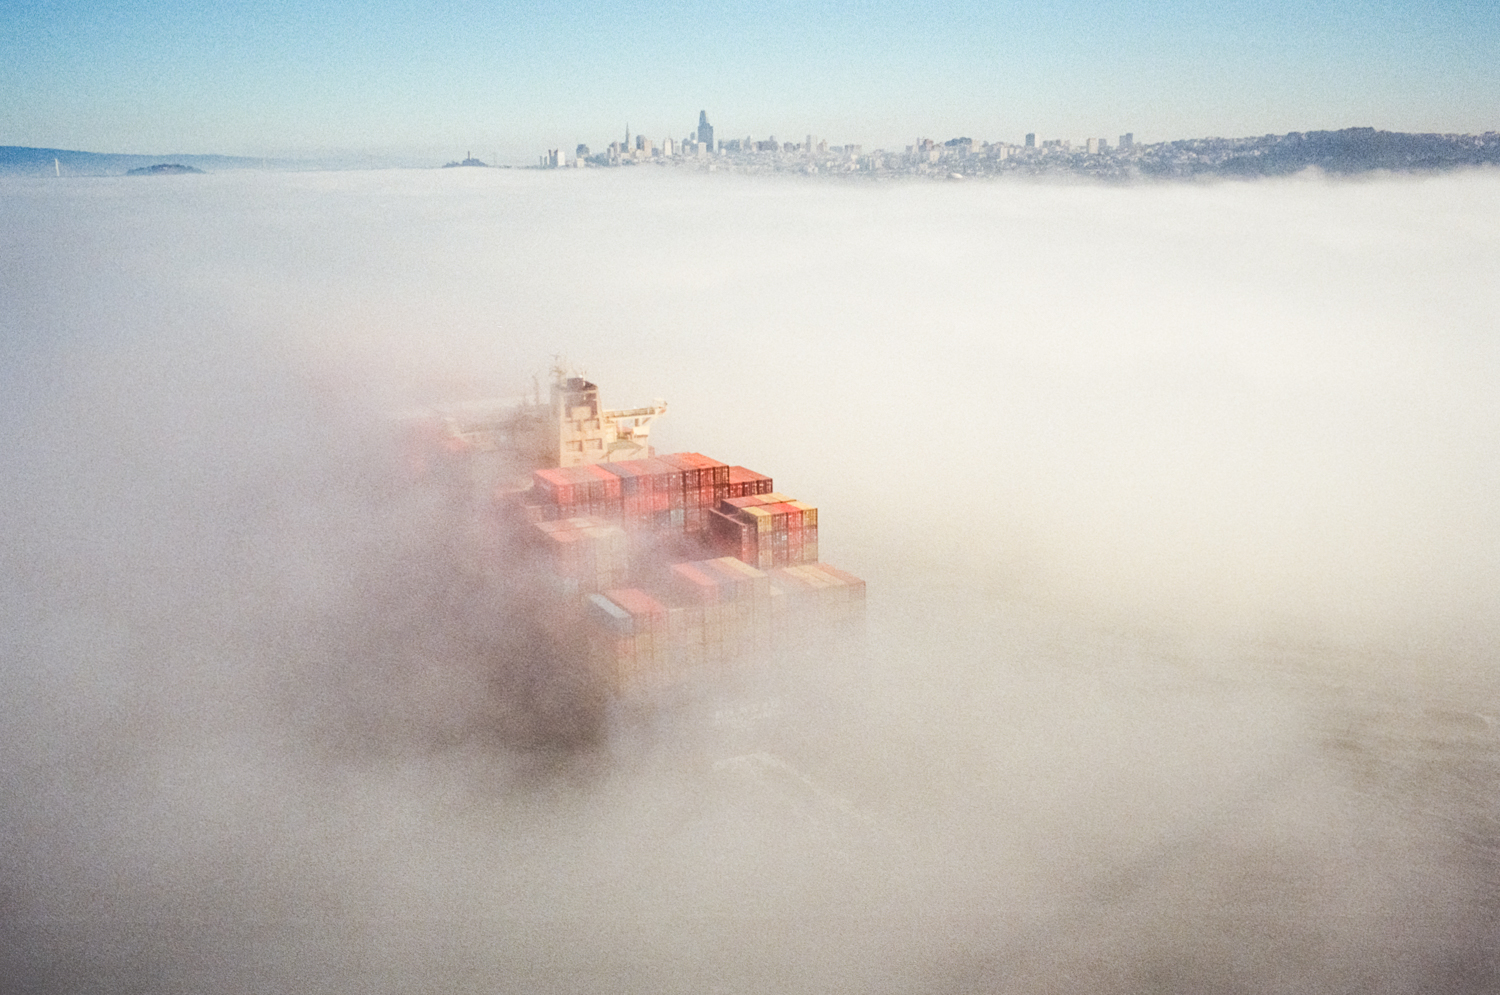 A container ship cuts through the low fog in June 2018.